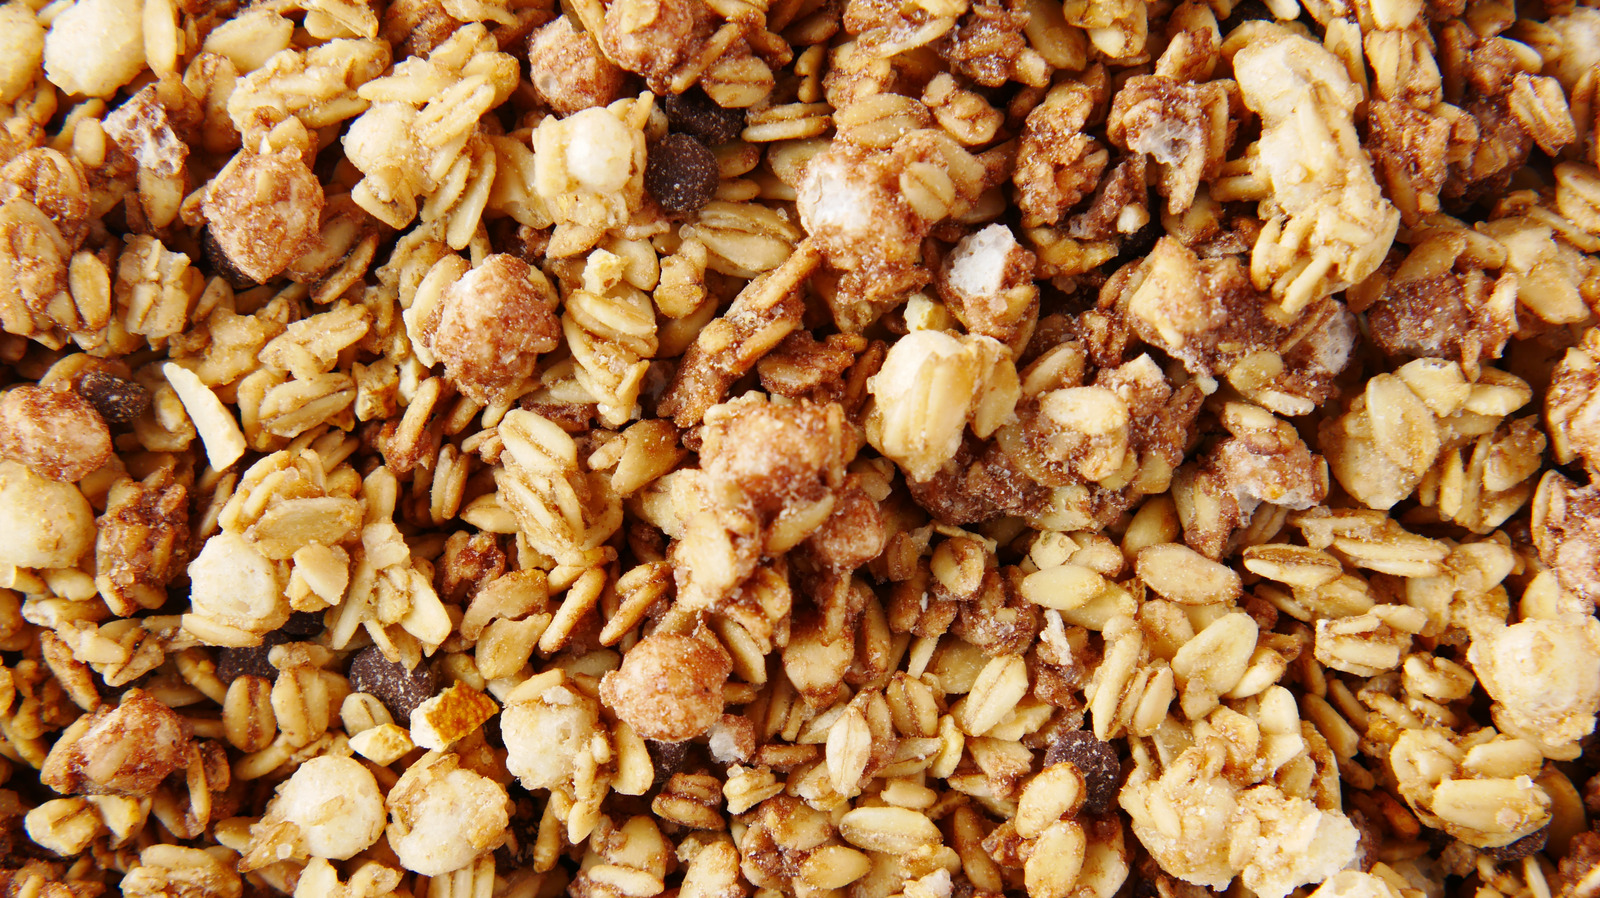 A Kellog's Lawsuit Is The Reason We Have 'Granola' Today